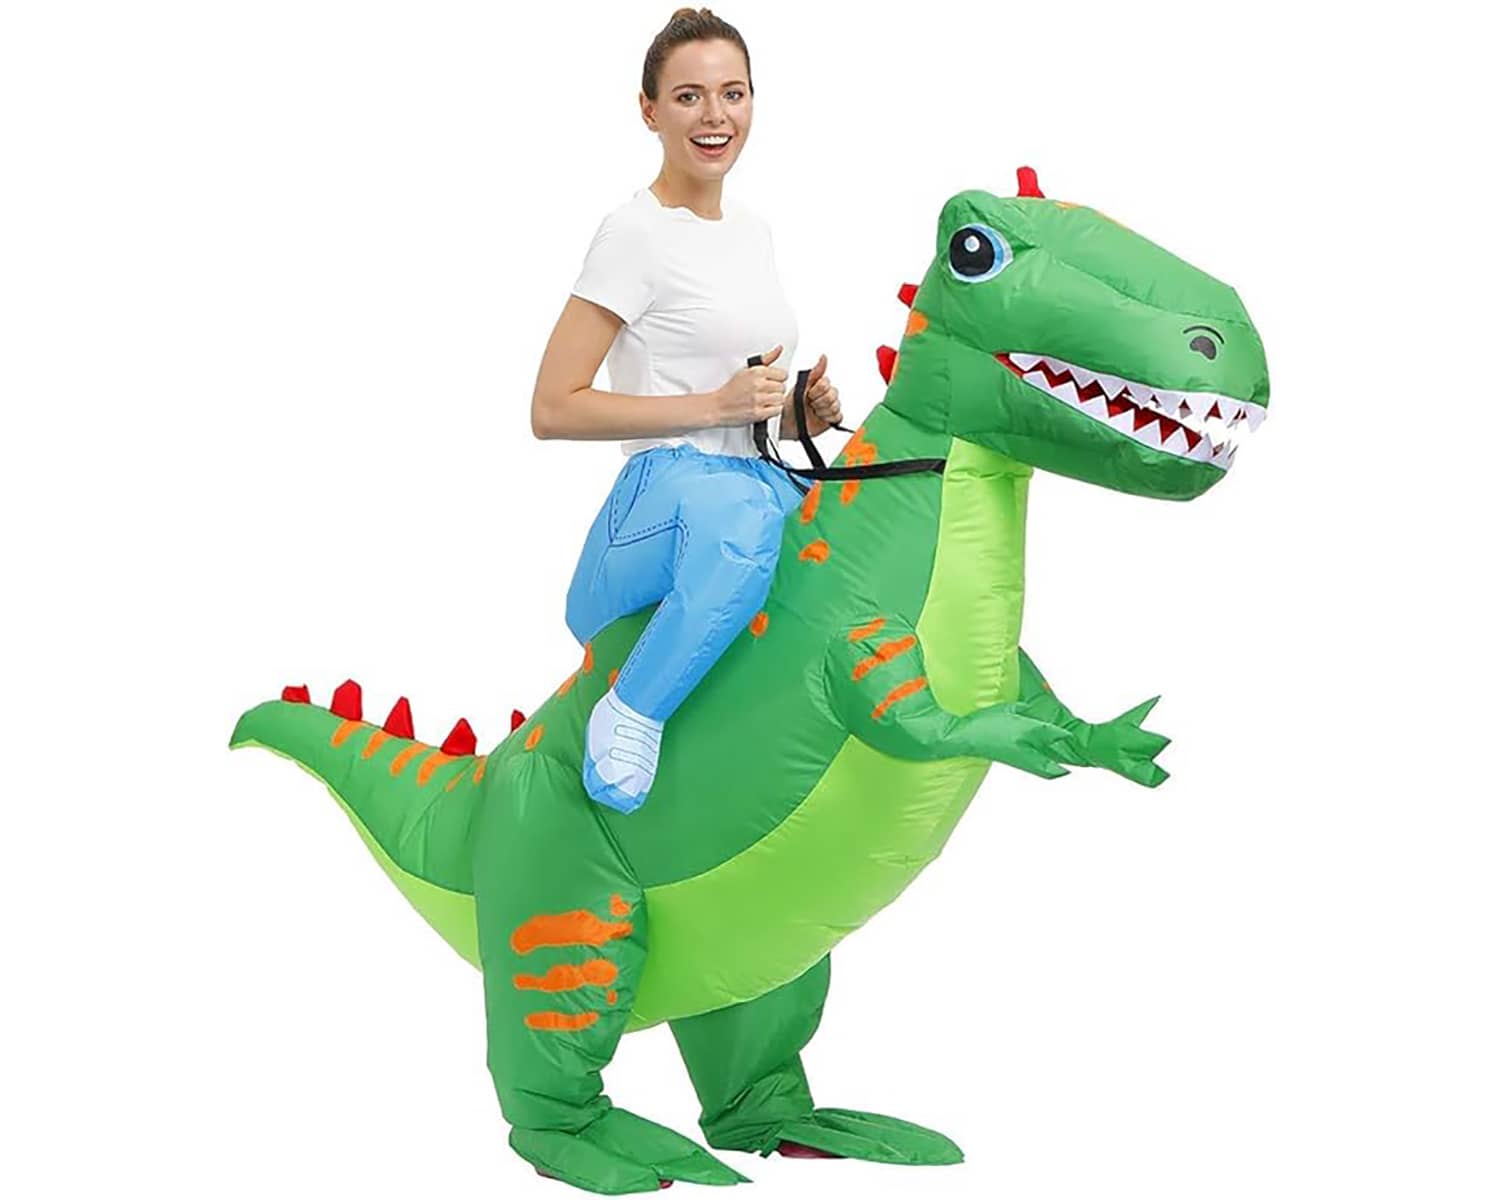 KOOY Inflatable Costume Adult Ride On Dinosaur Costume Halloween Costumes for Men Women Blow up Costumes